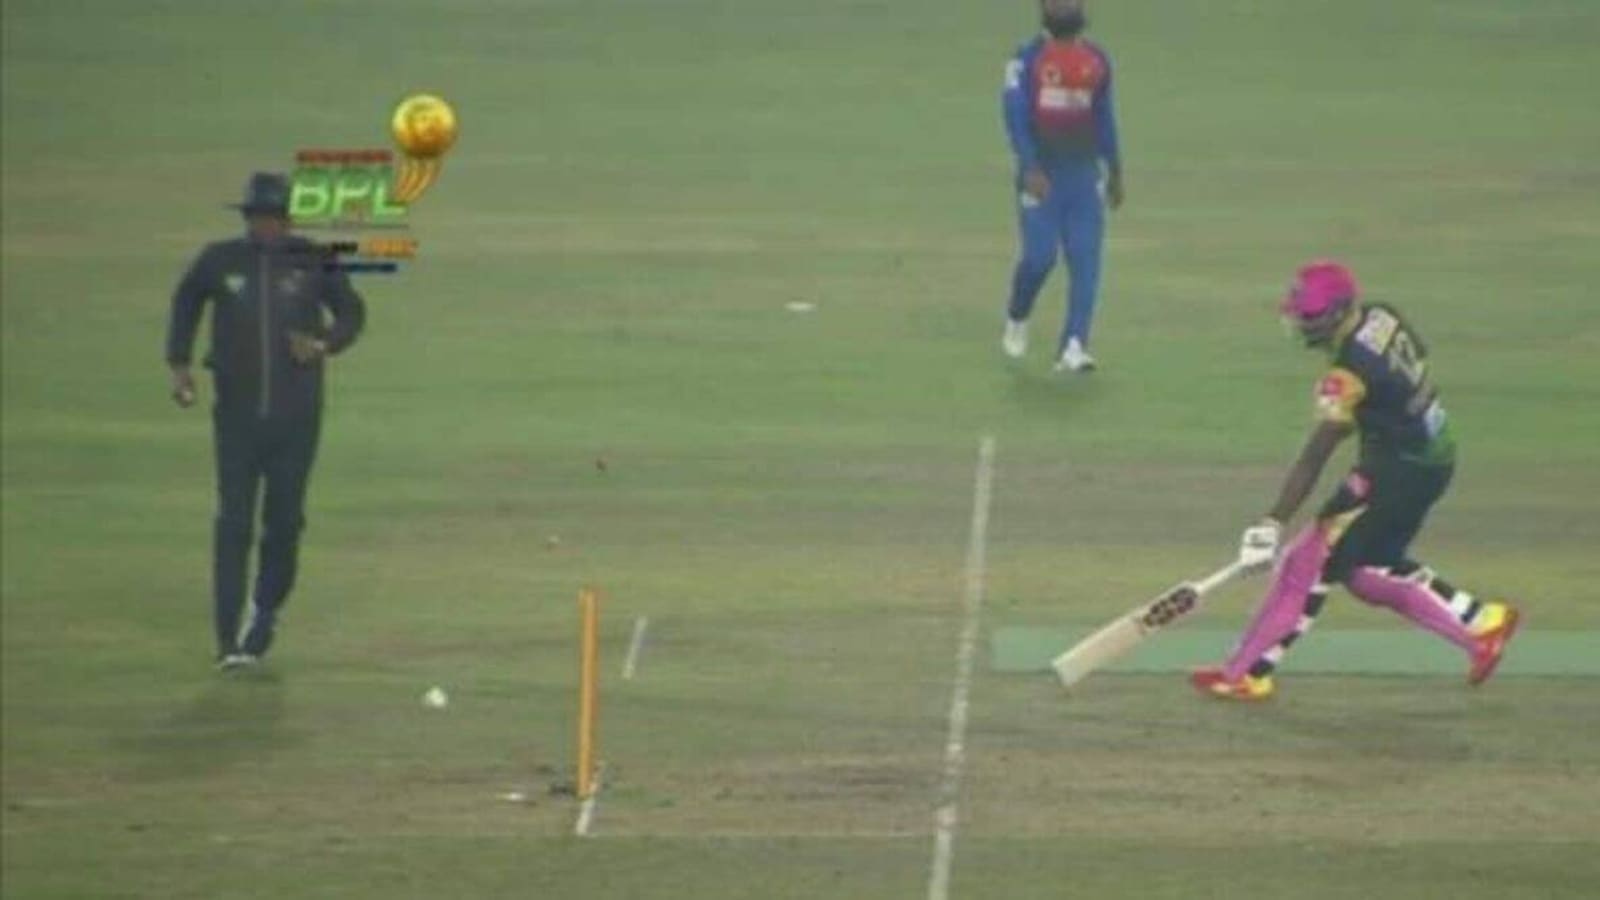 BPL Andre Russell dismissed in a bizarre run-out, video goes viral- WATCH Cricket